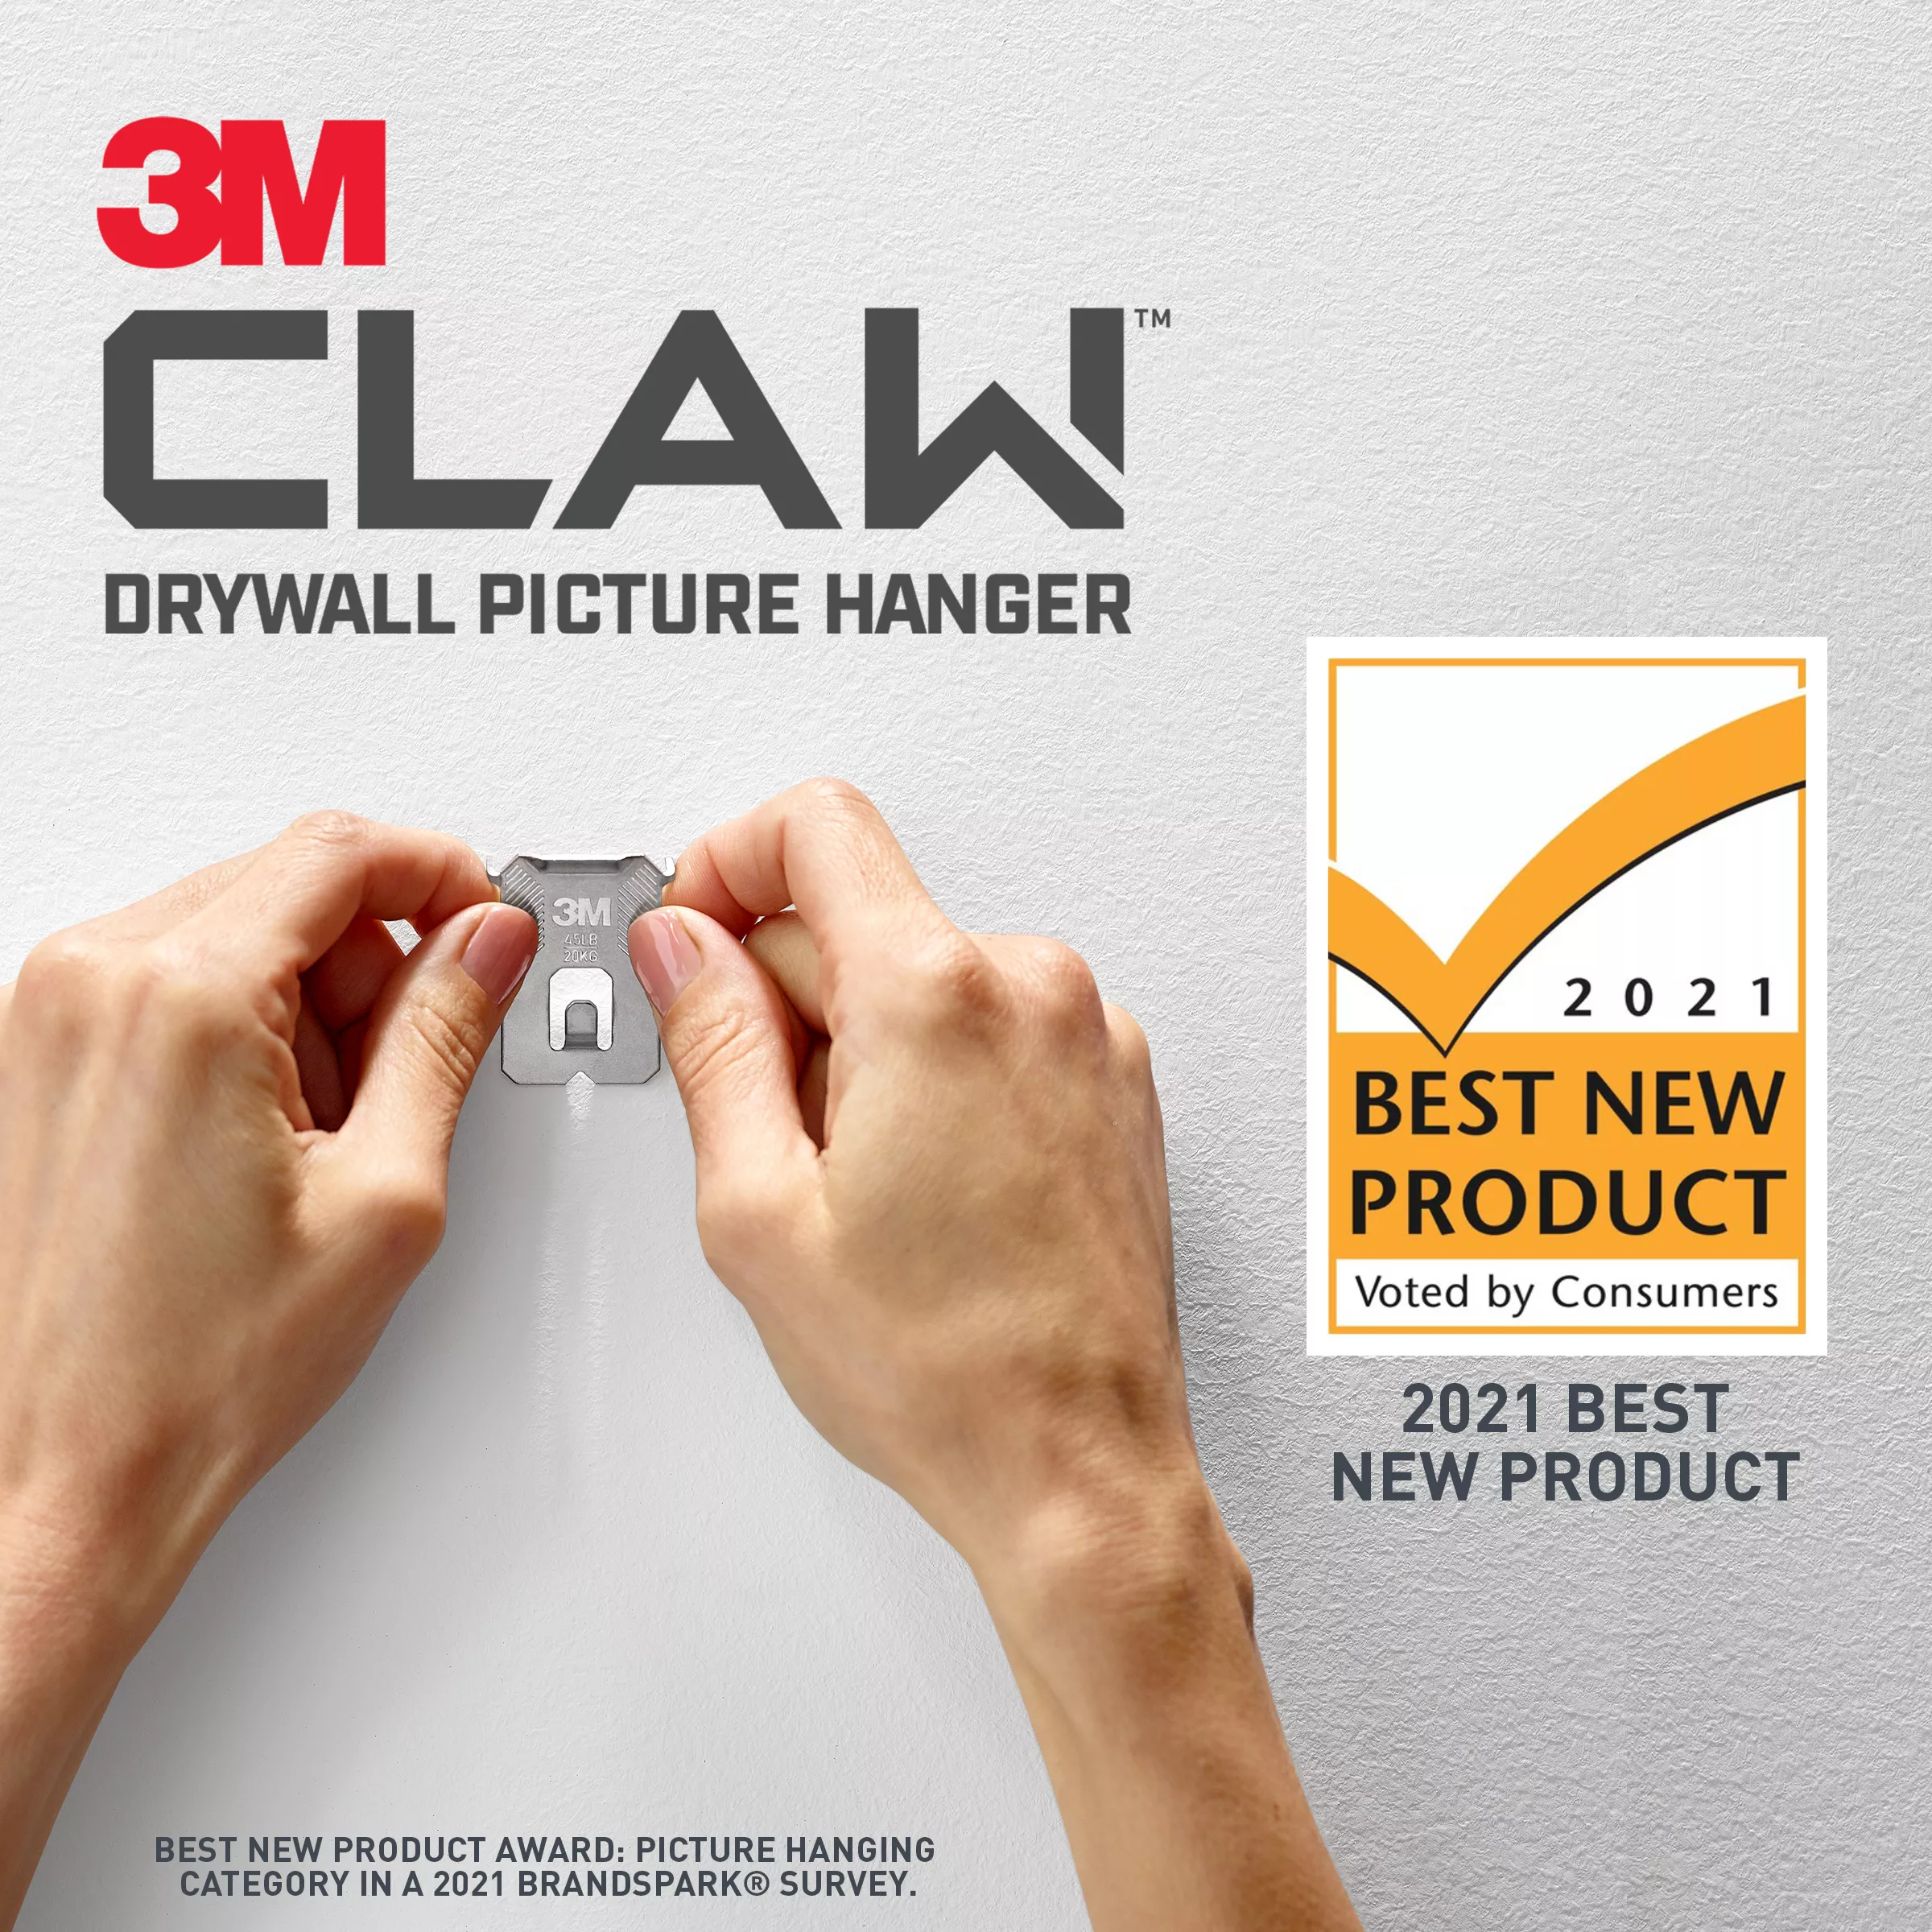 SKU 7100248597 | 3M CLAW™ 65lb Drywall Picture Hanger with Spot Marker 3PH65M-1EF